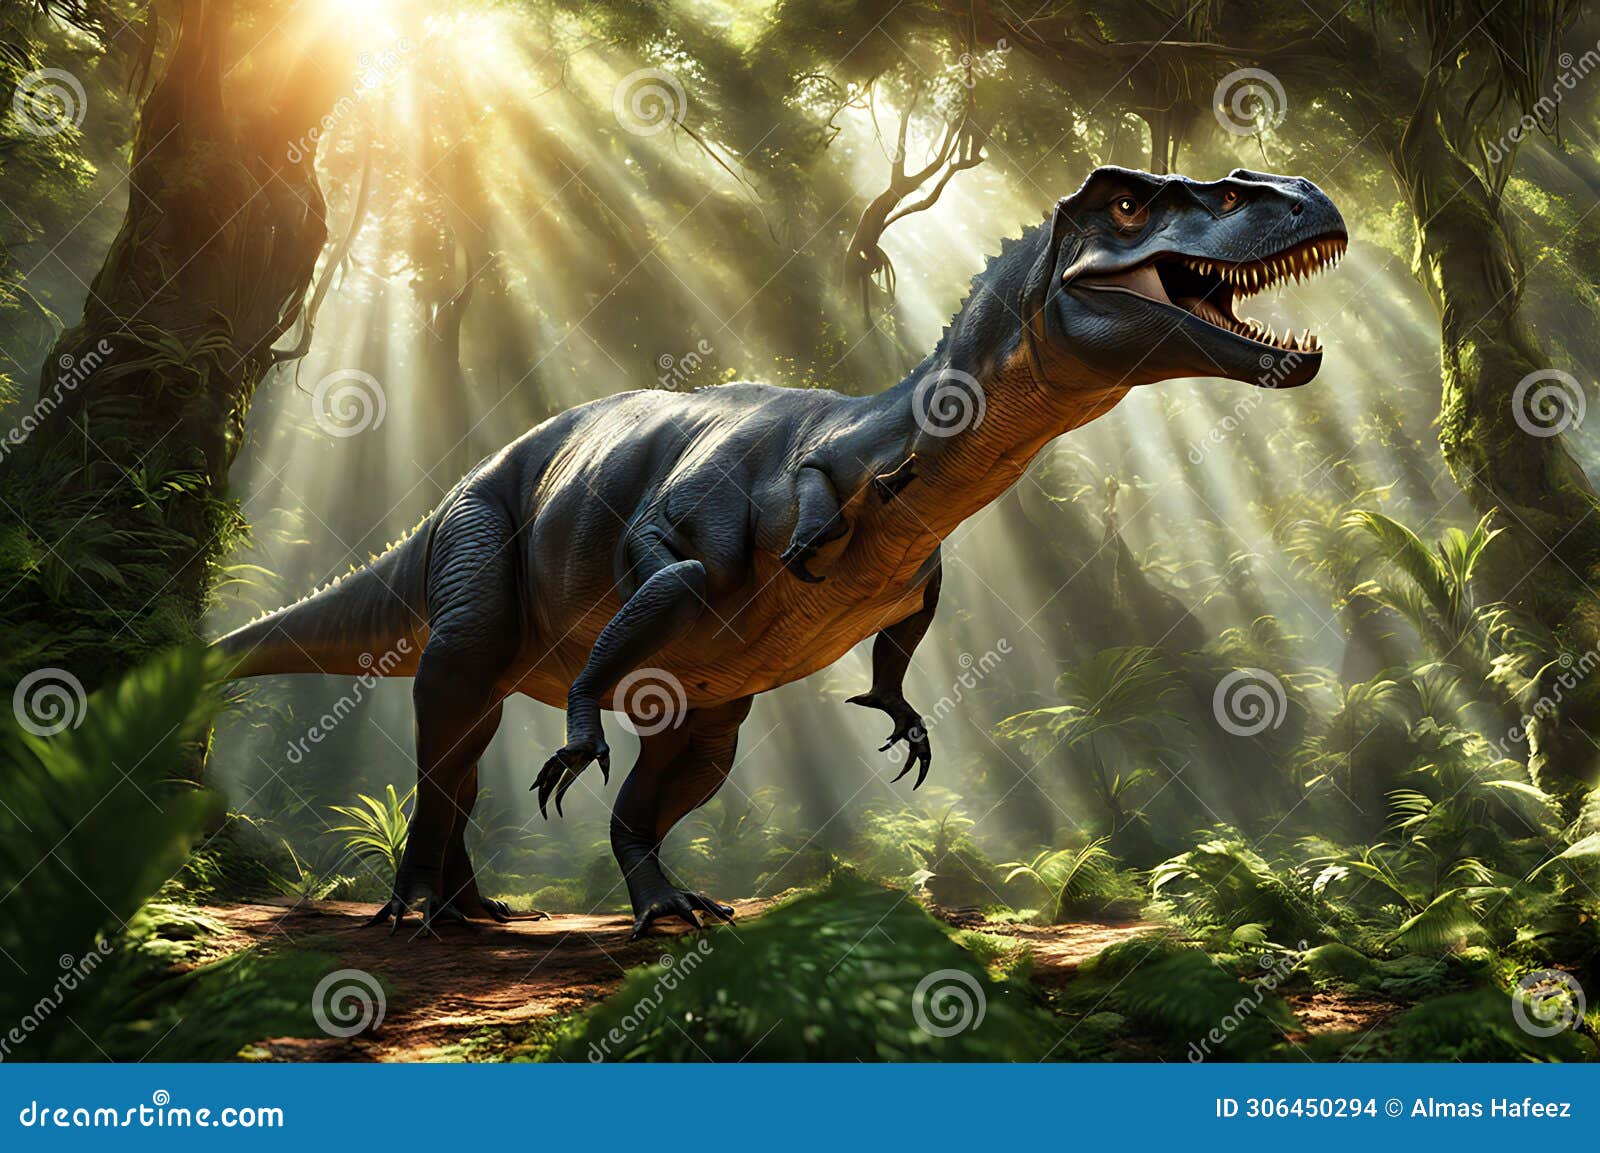 majestic dinosaur dominating the frame - crisp details outlining the scales with soft focus vegetation in the background